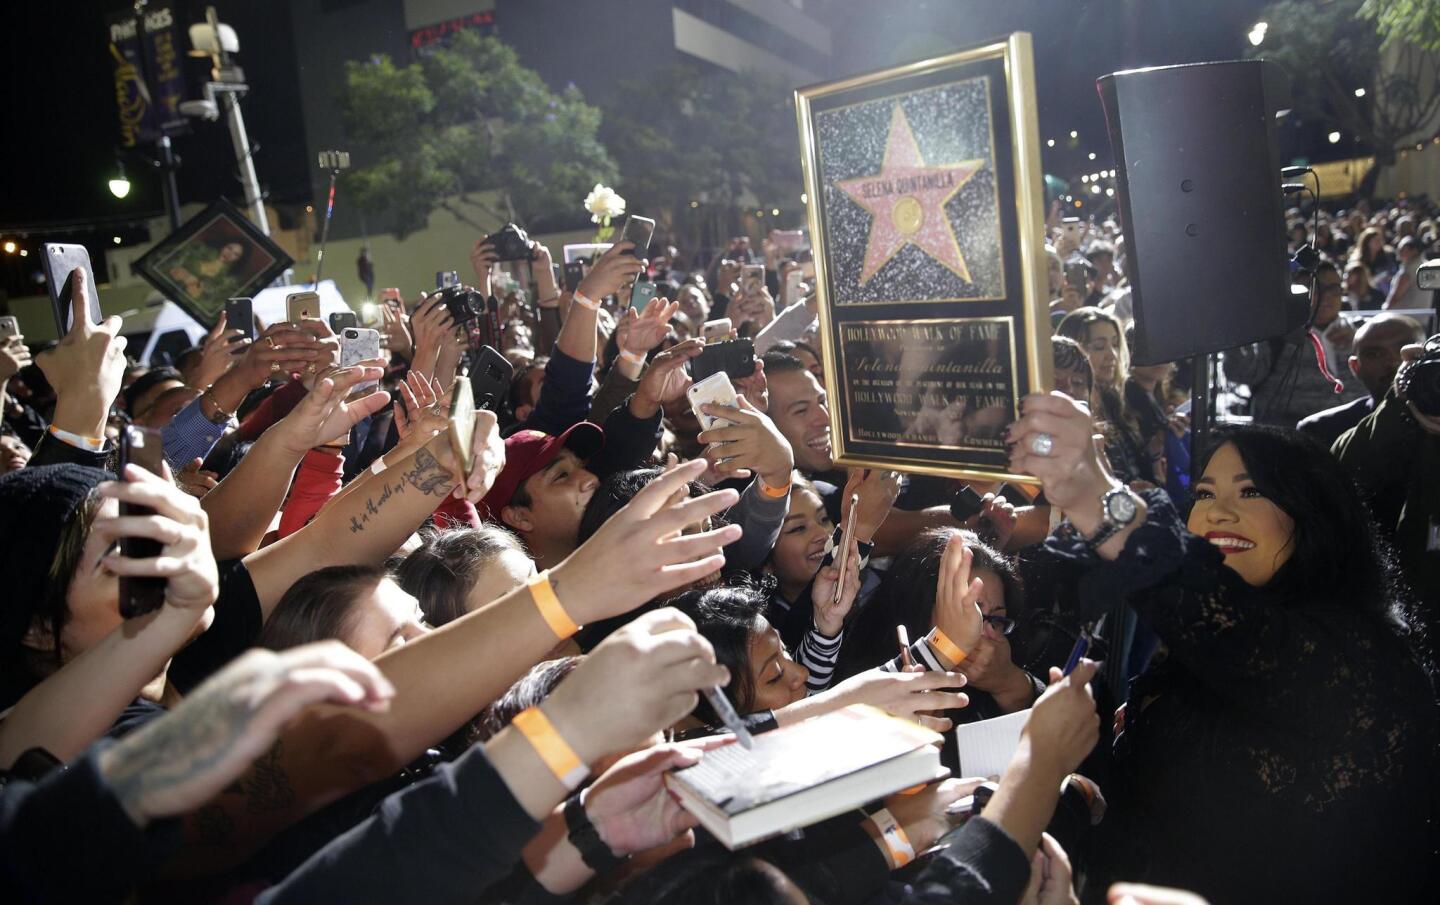 US-Mexican singer Selena Quintanilla honored with a posthumous star on the Hollywood Walk of Fame